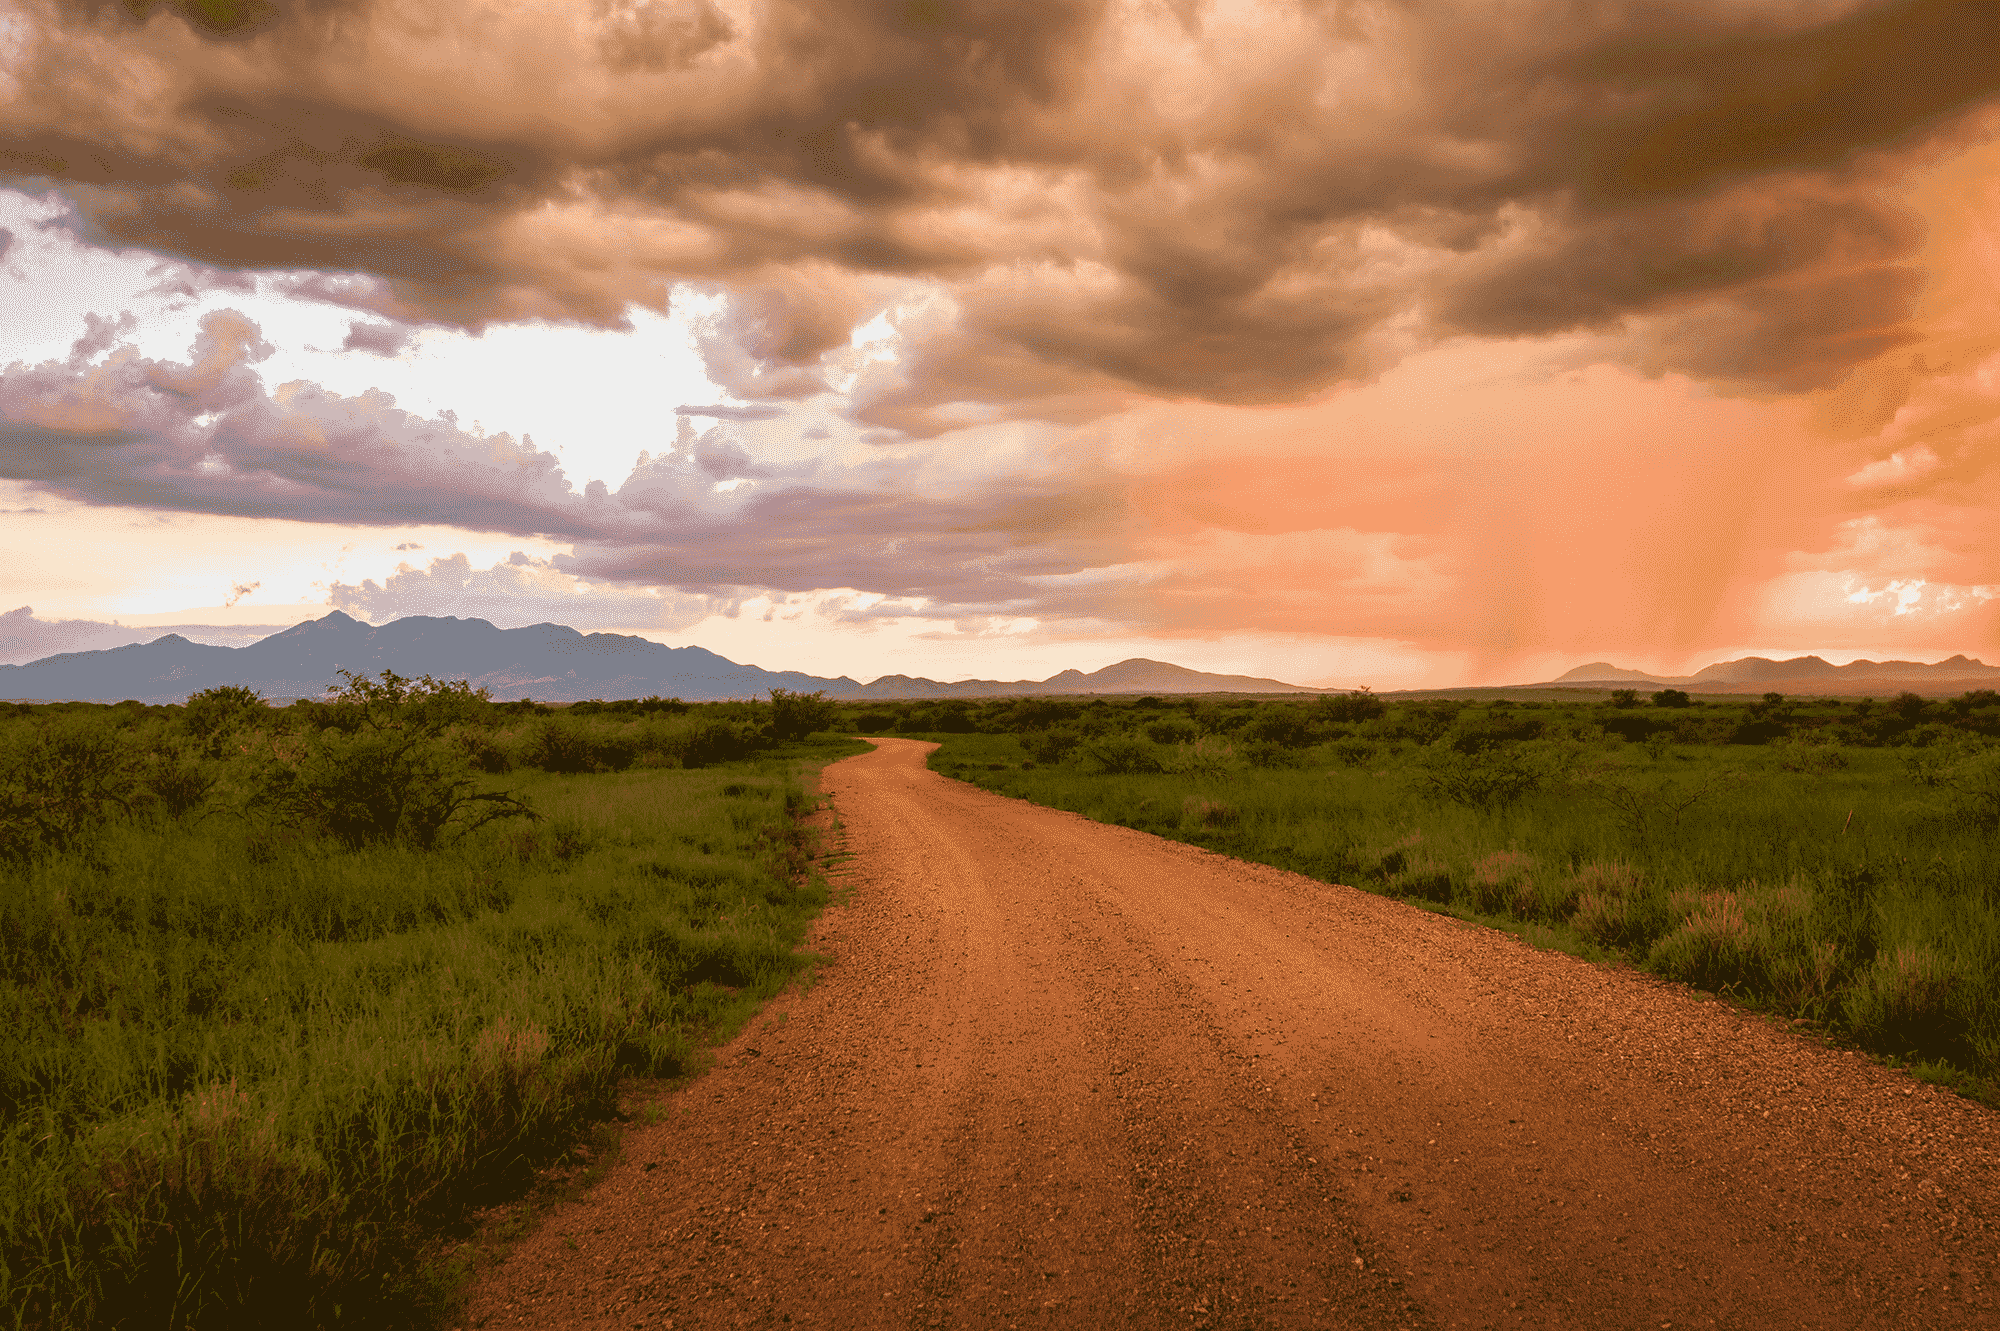 Dirt road with greenery and a beautiful cloudy sky